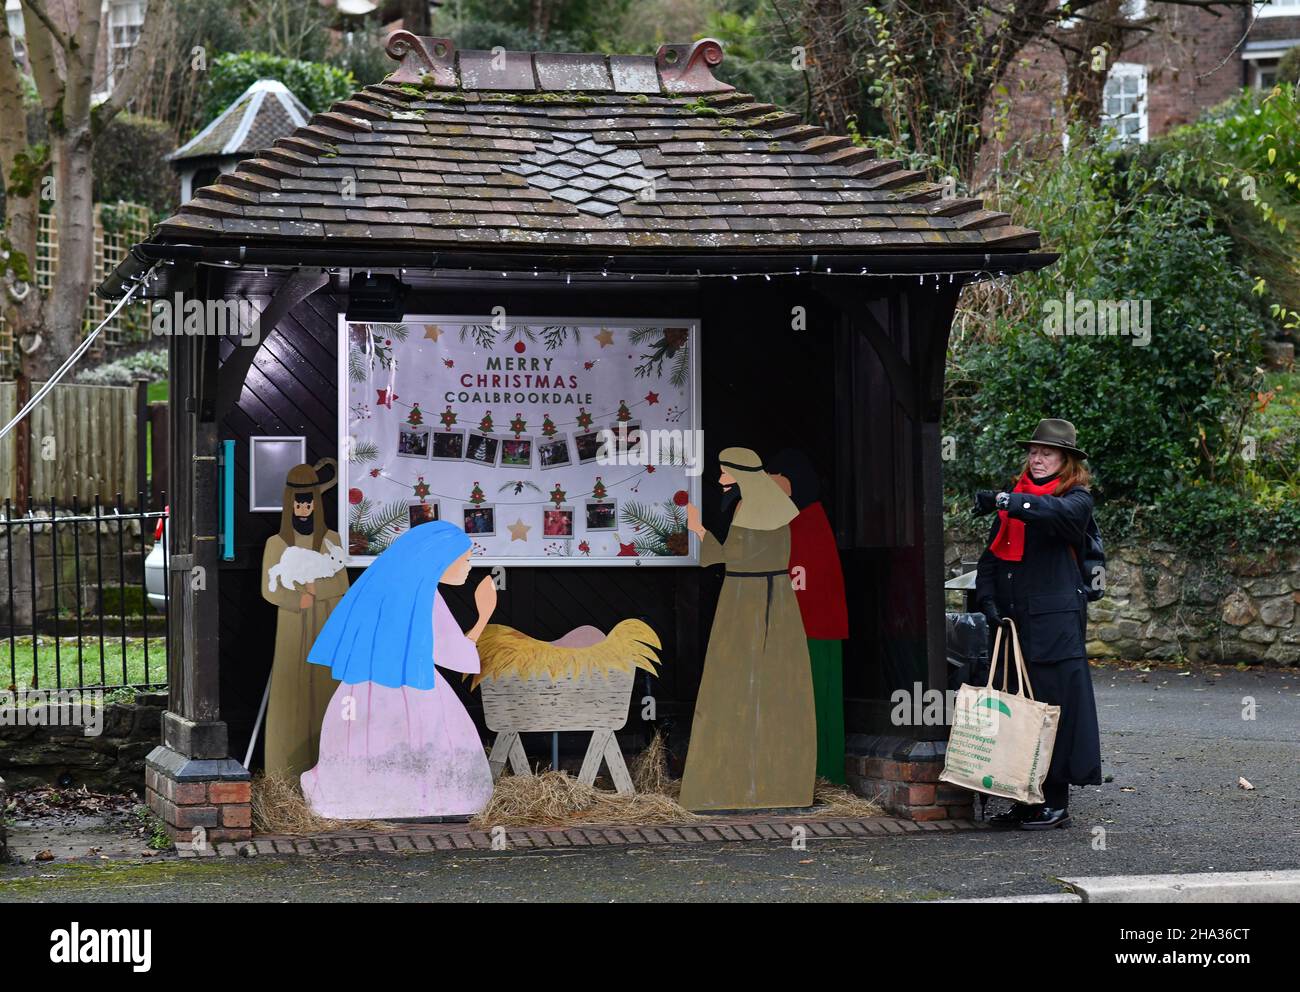 Shropshire, UK. 10th Dec, 2021. Coalbrookdale, Shropshire, Uk December 10th 2021. No room at the shelter! A commuter waiting at the village bus stop in Coalbrookdale, Shropshire stands outside the bus shelter as it is now locating the school Christmas Nativity Scene. Credit: David Bagnall/Alamy Live News Stock Photo